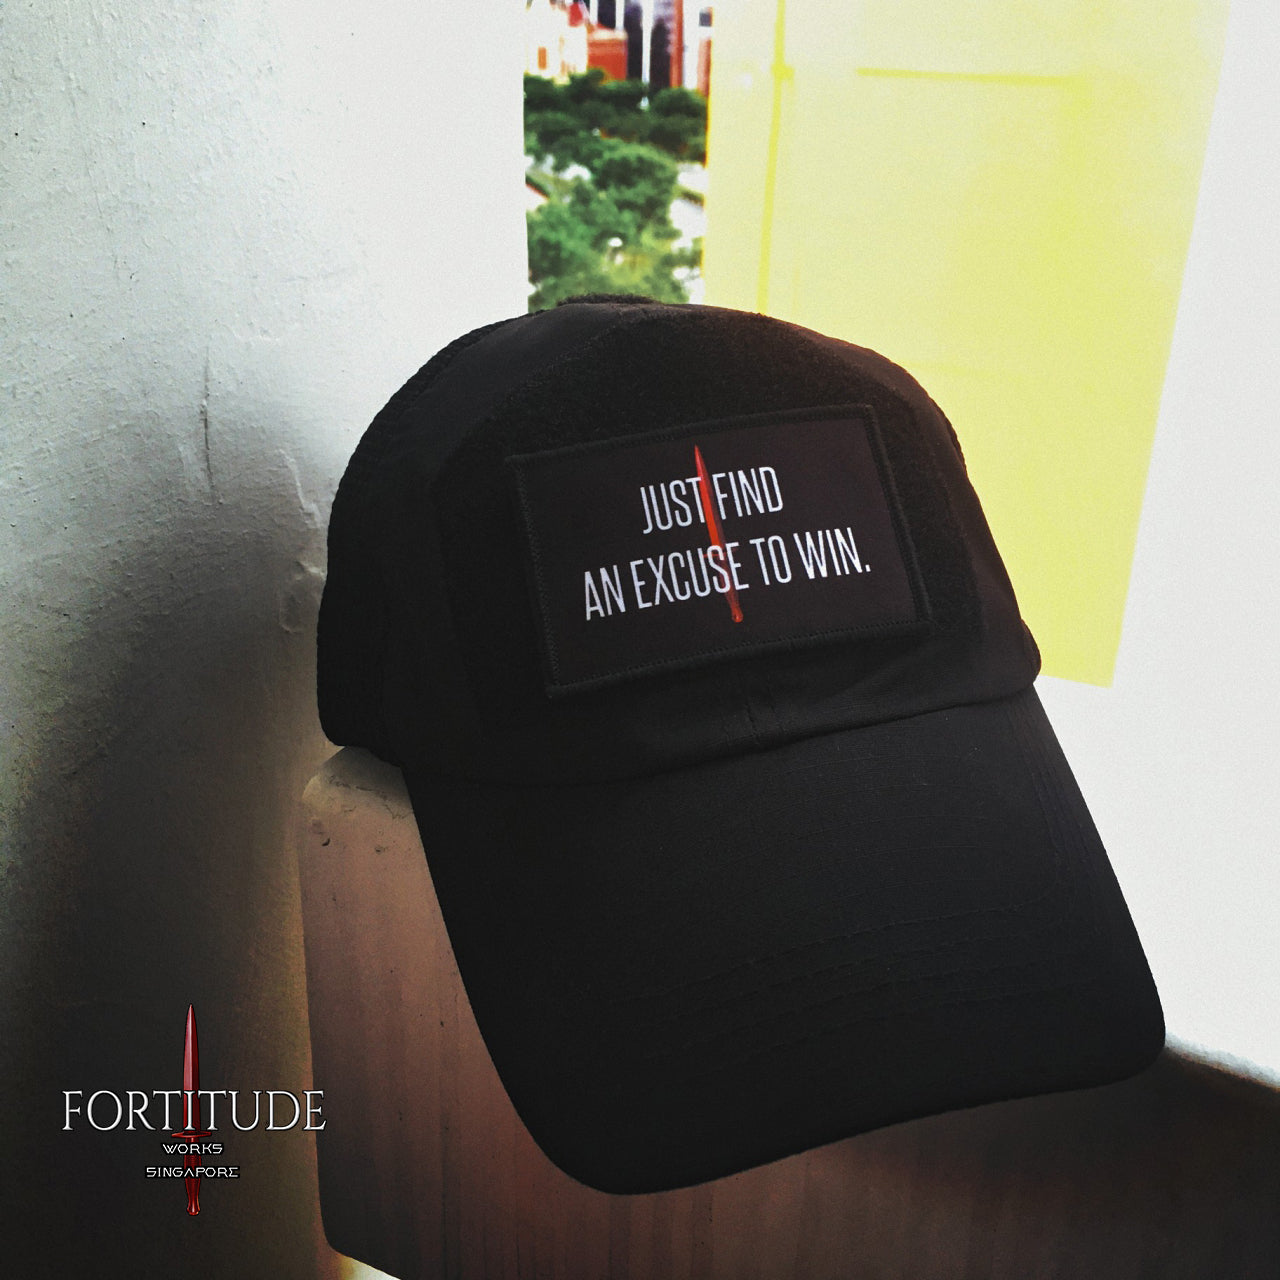 JUST FIND AN EXCUSE TO WIN - FORTITUDE WORKS SINGAPORE